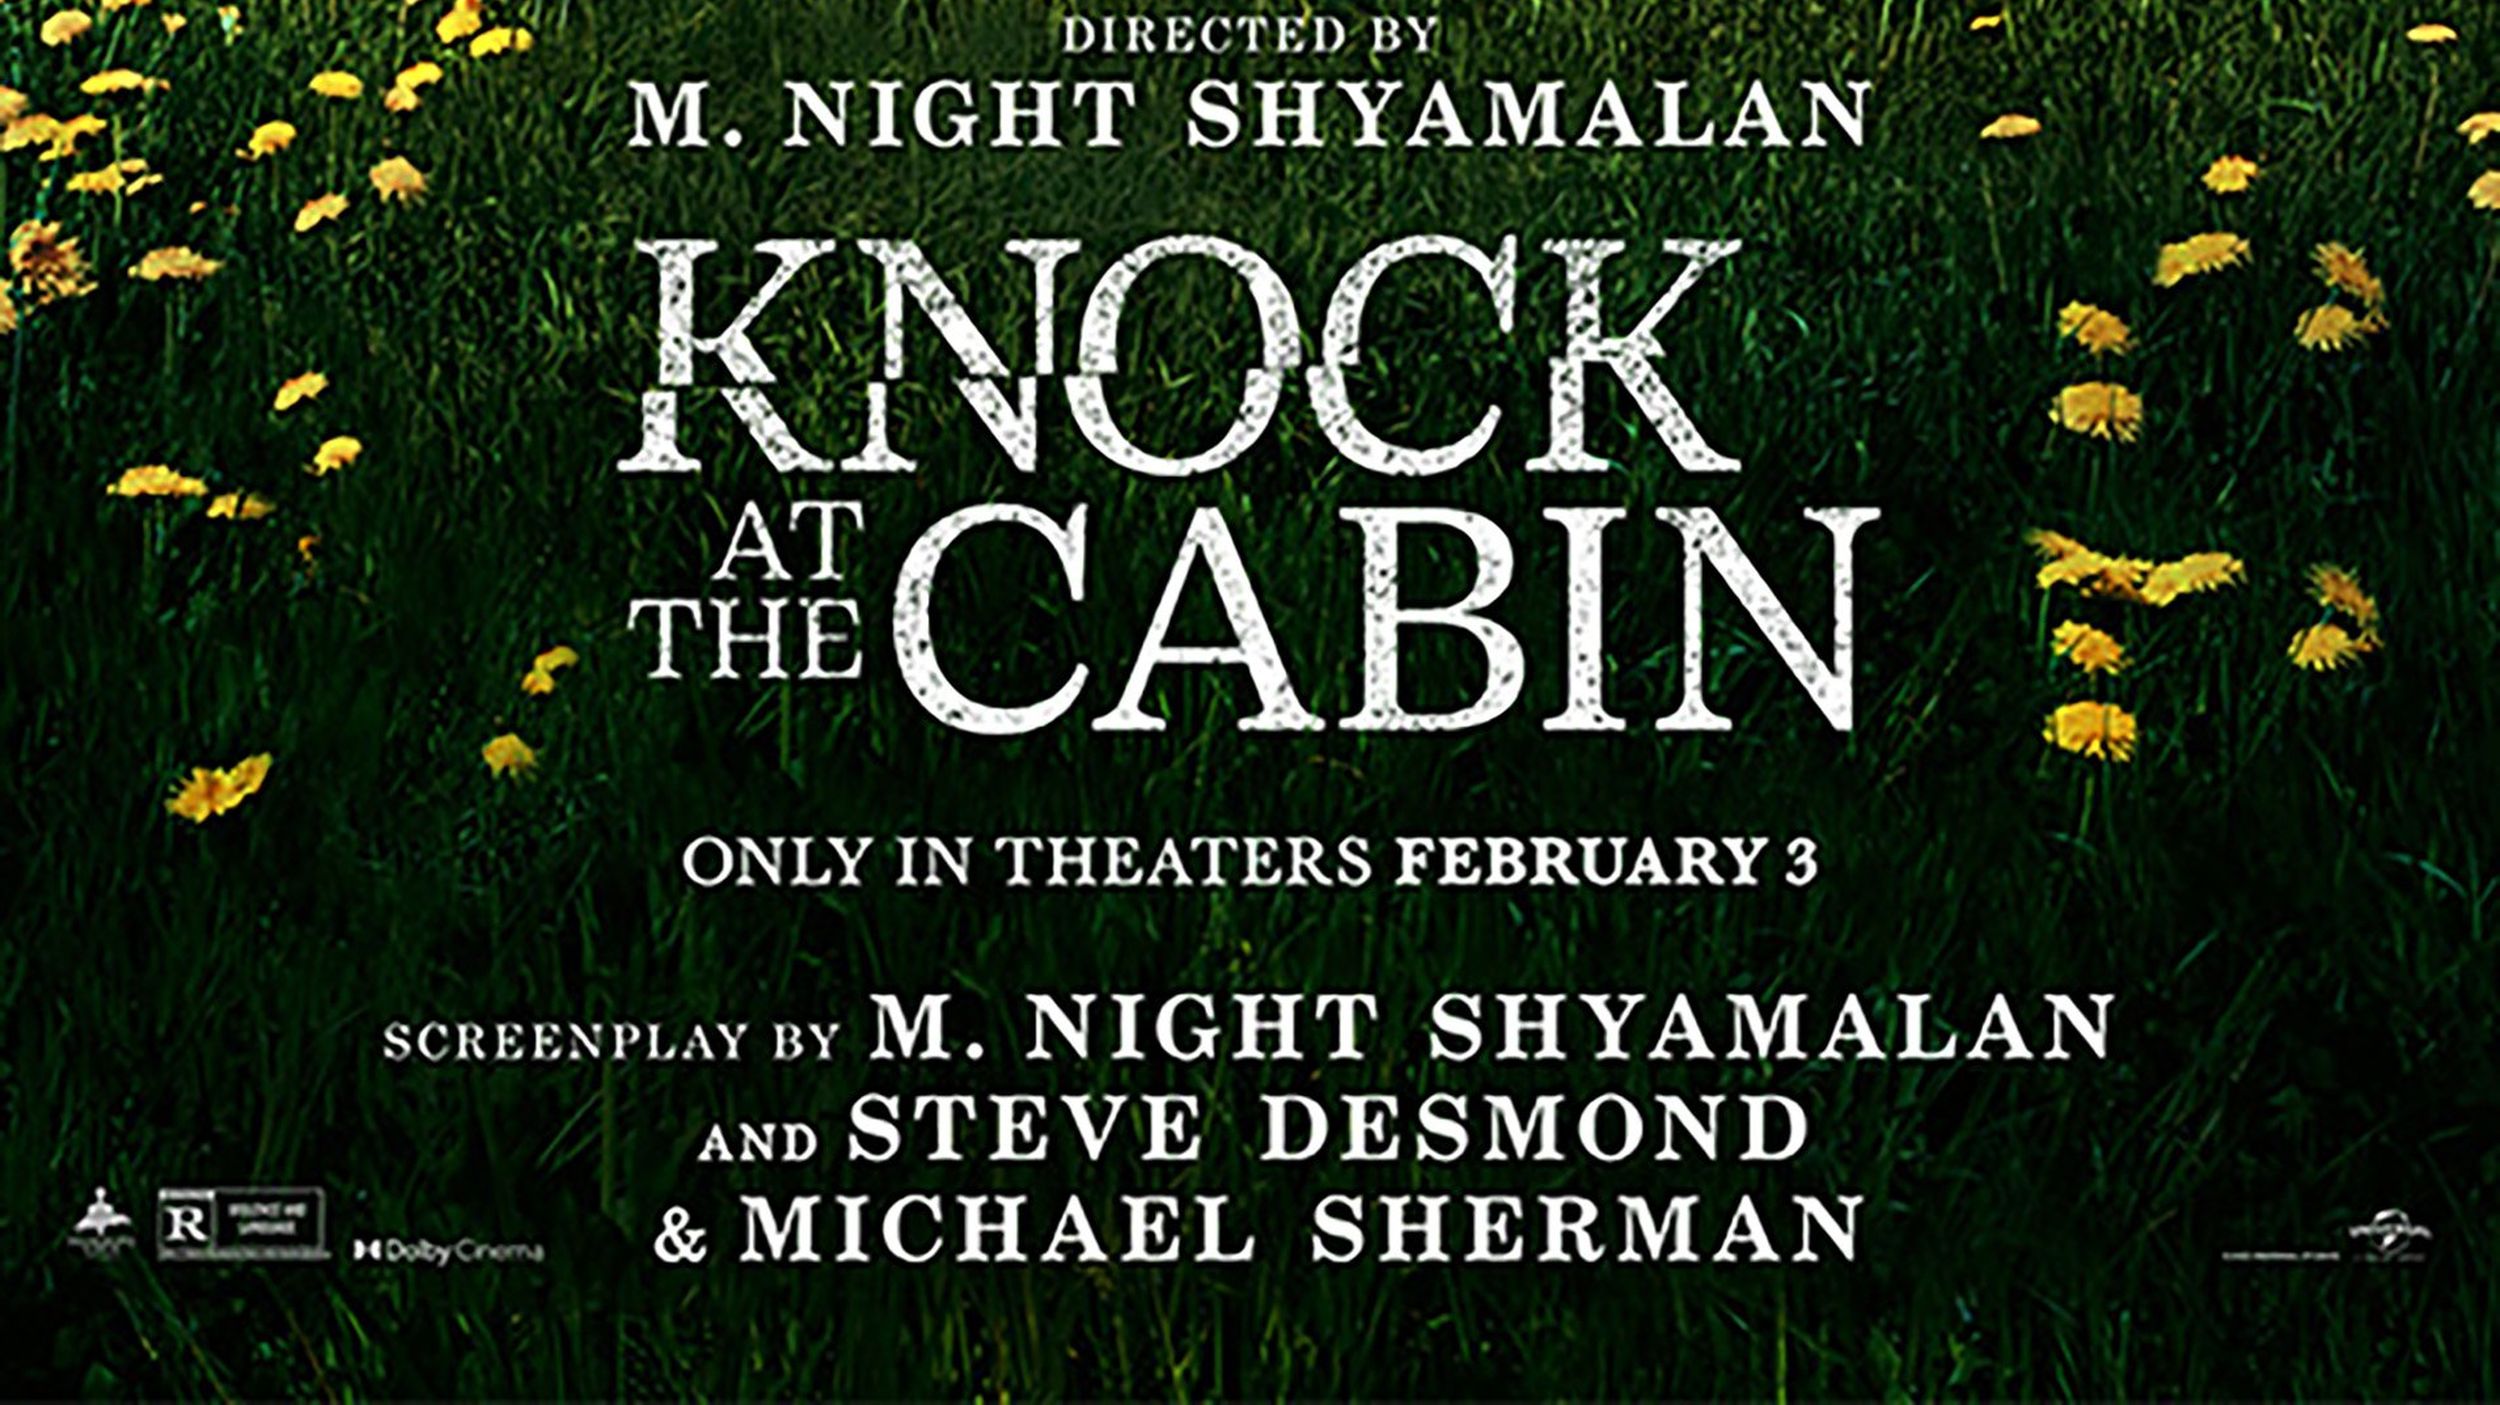 Movie review: M. Night Shyamalan brings signature touch, good and